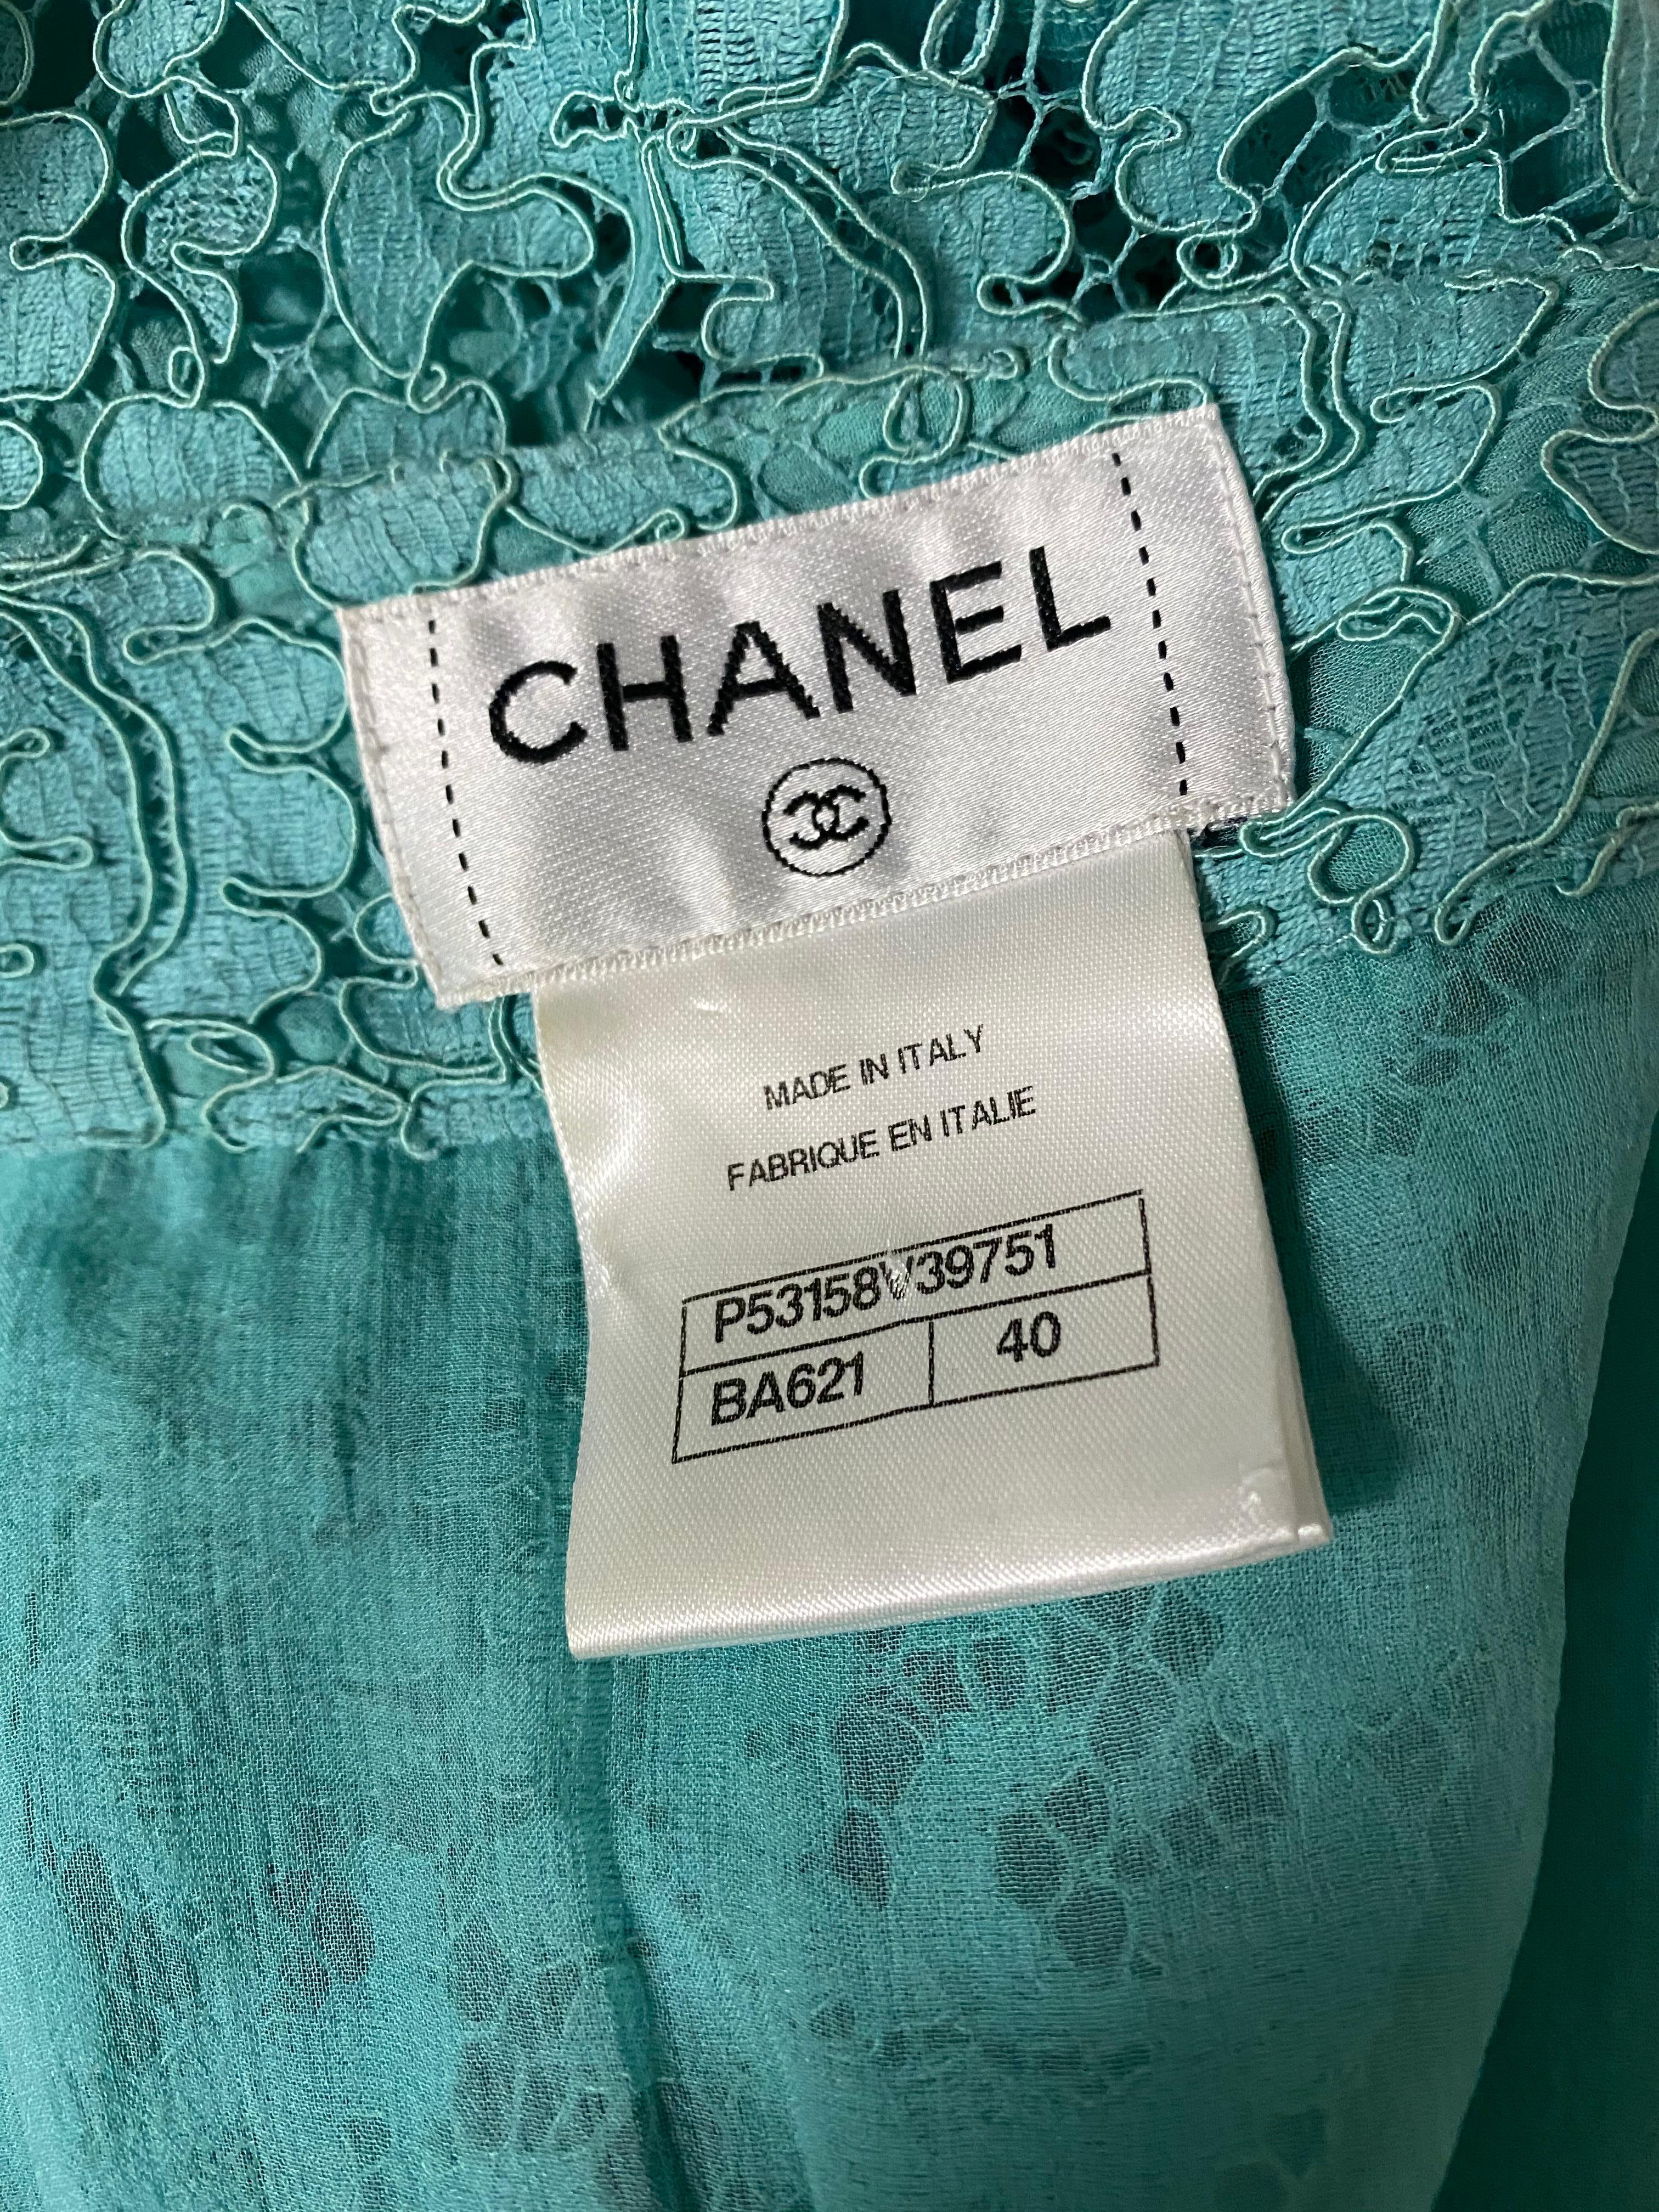 Chanel Turquoise Floral Lace Top and Skirt Set Size 40 For Sale 6